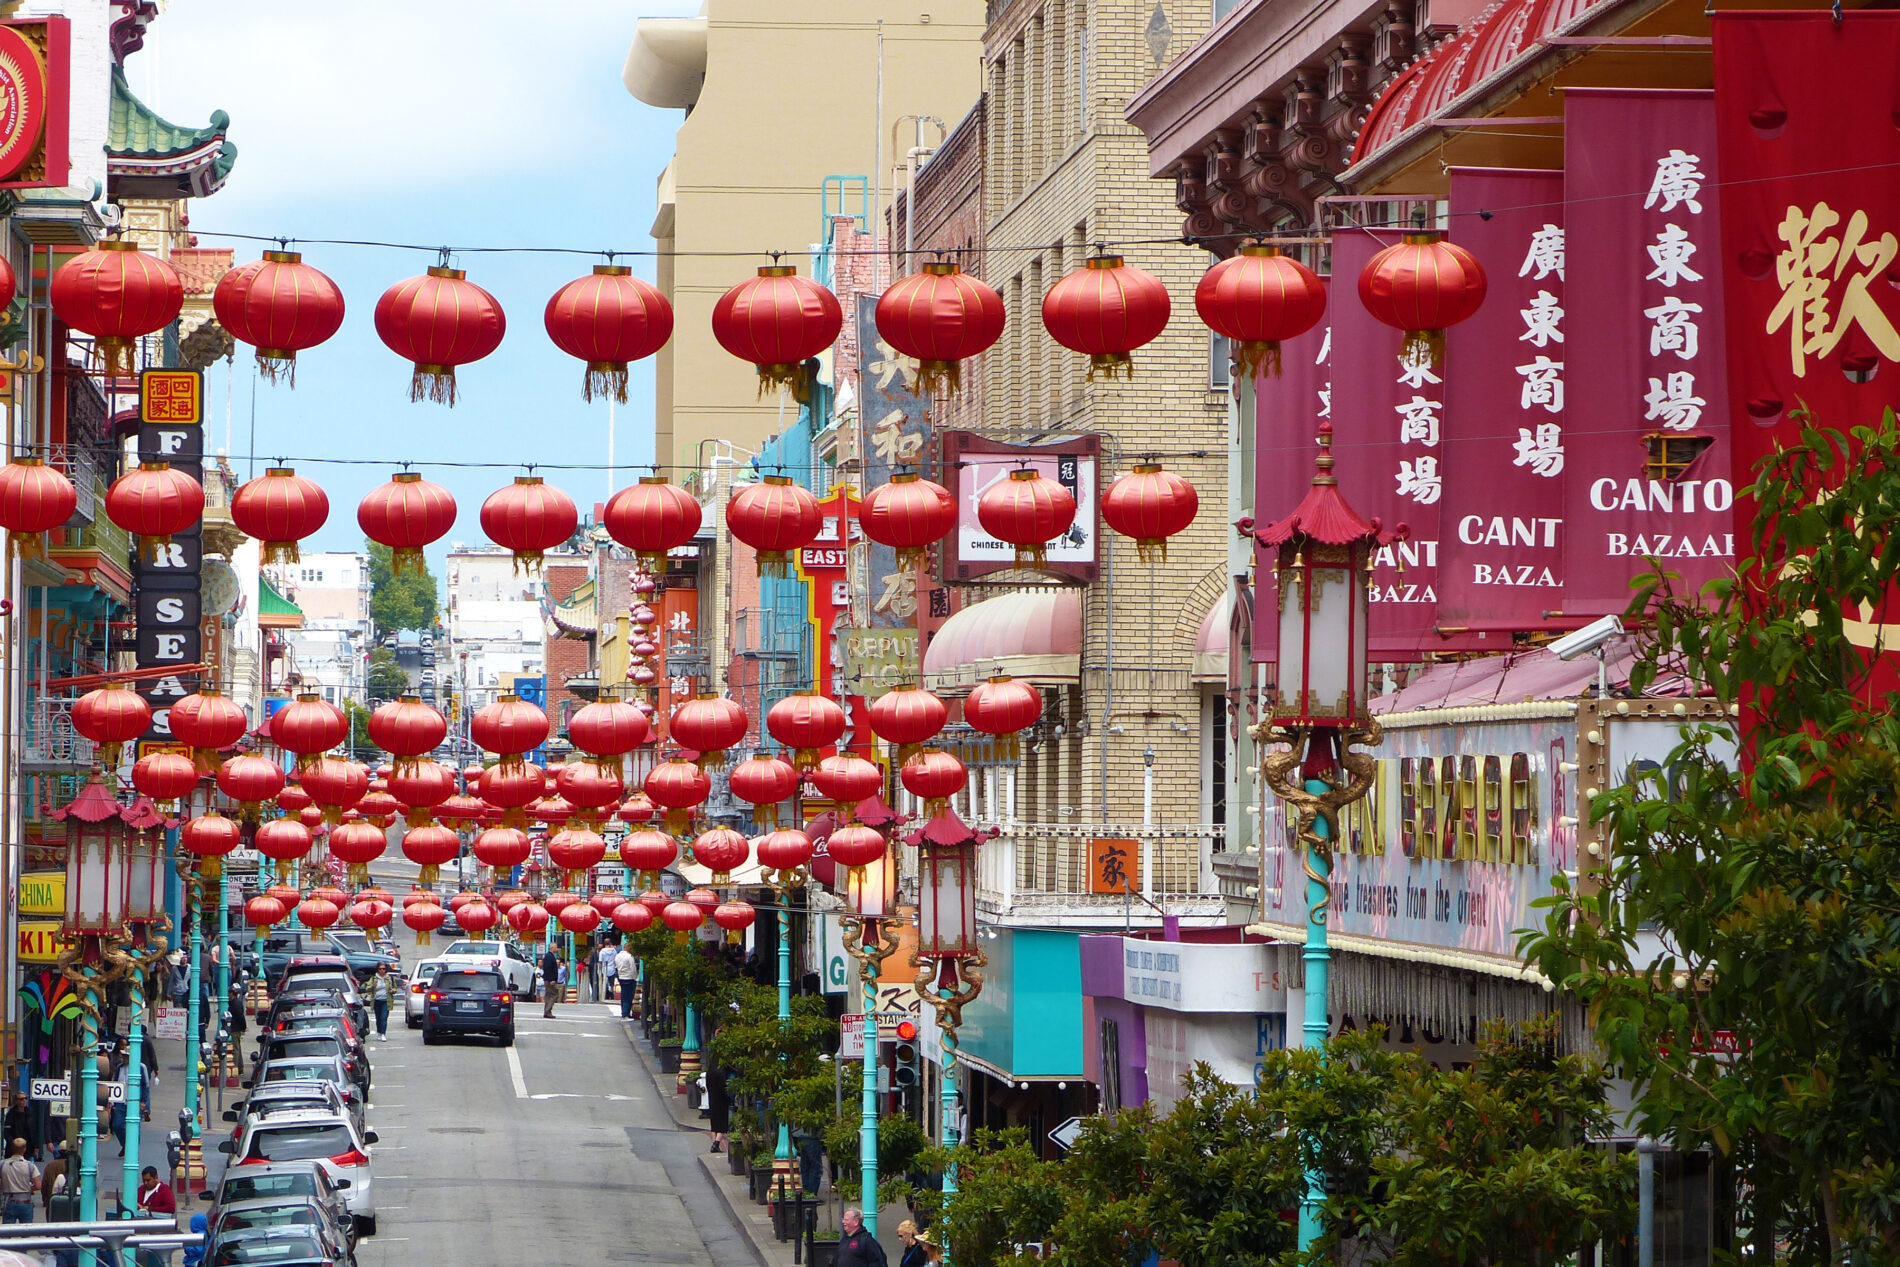 San Francisco’s Chinatown with row after row of strings of red lanterns hanging over Grant Avenue.